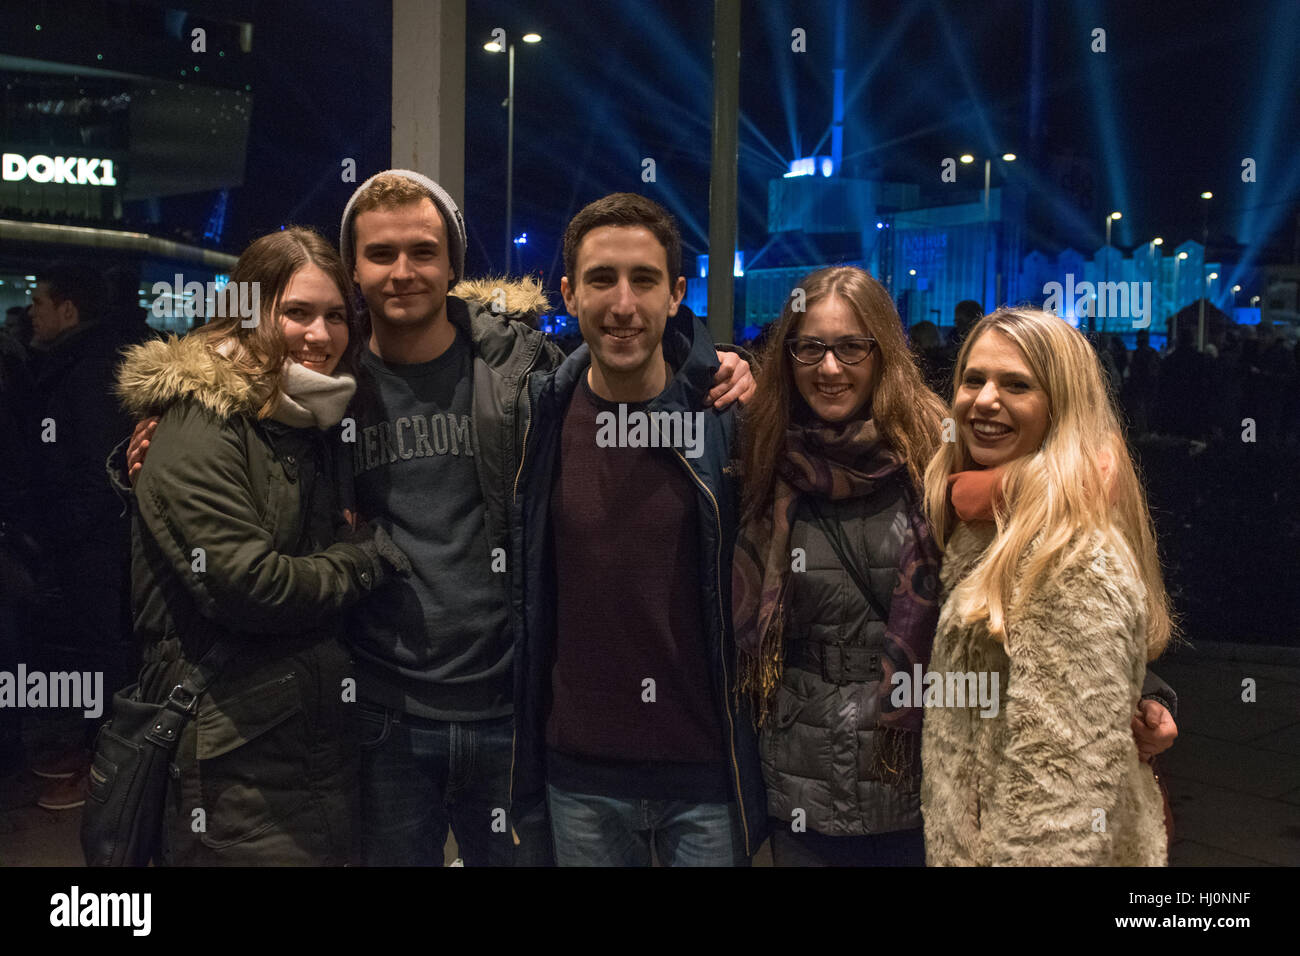 Aarhus, Denmark. 21st Jan, 2017. From left to right Boglar, 18, Wiktor, 18, Marco, 19, Natalia, 19, and Christiana, 19. From Hungary, Italy, Poland and Moldova respectivley. They described the opening ceremony of Aarhus 2017 European Capital of Culture as 'spectacular' and were excited to see how the new atmosphere in the city would take affect. Credit: Matthew James Harrison/Alamy Live News Stock Photo